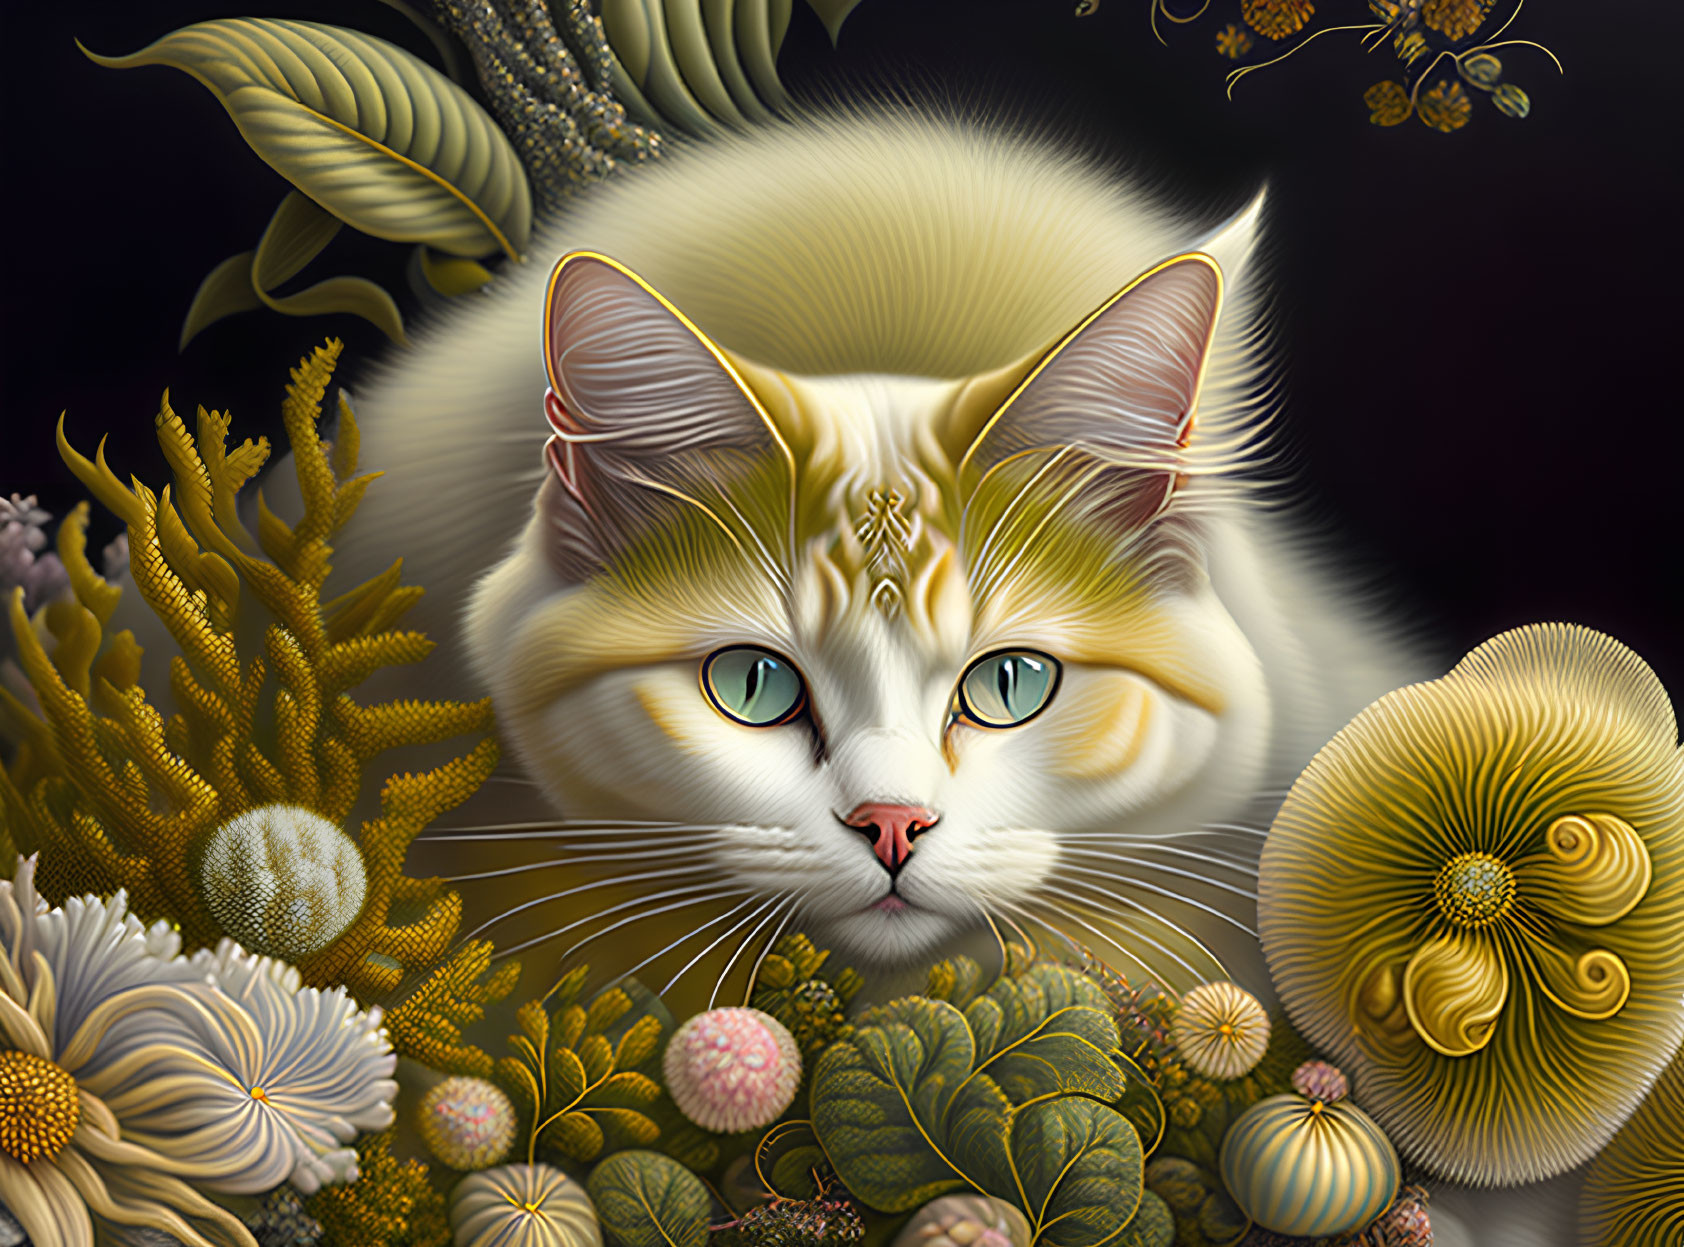 Detailed illustration of white and tan cat with green eyes amid flowers and marine plants